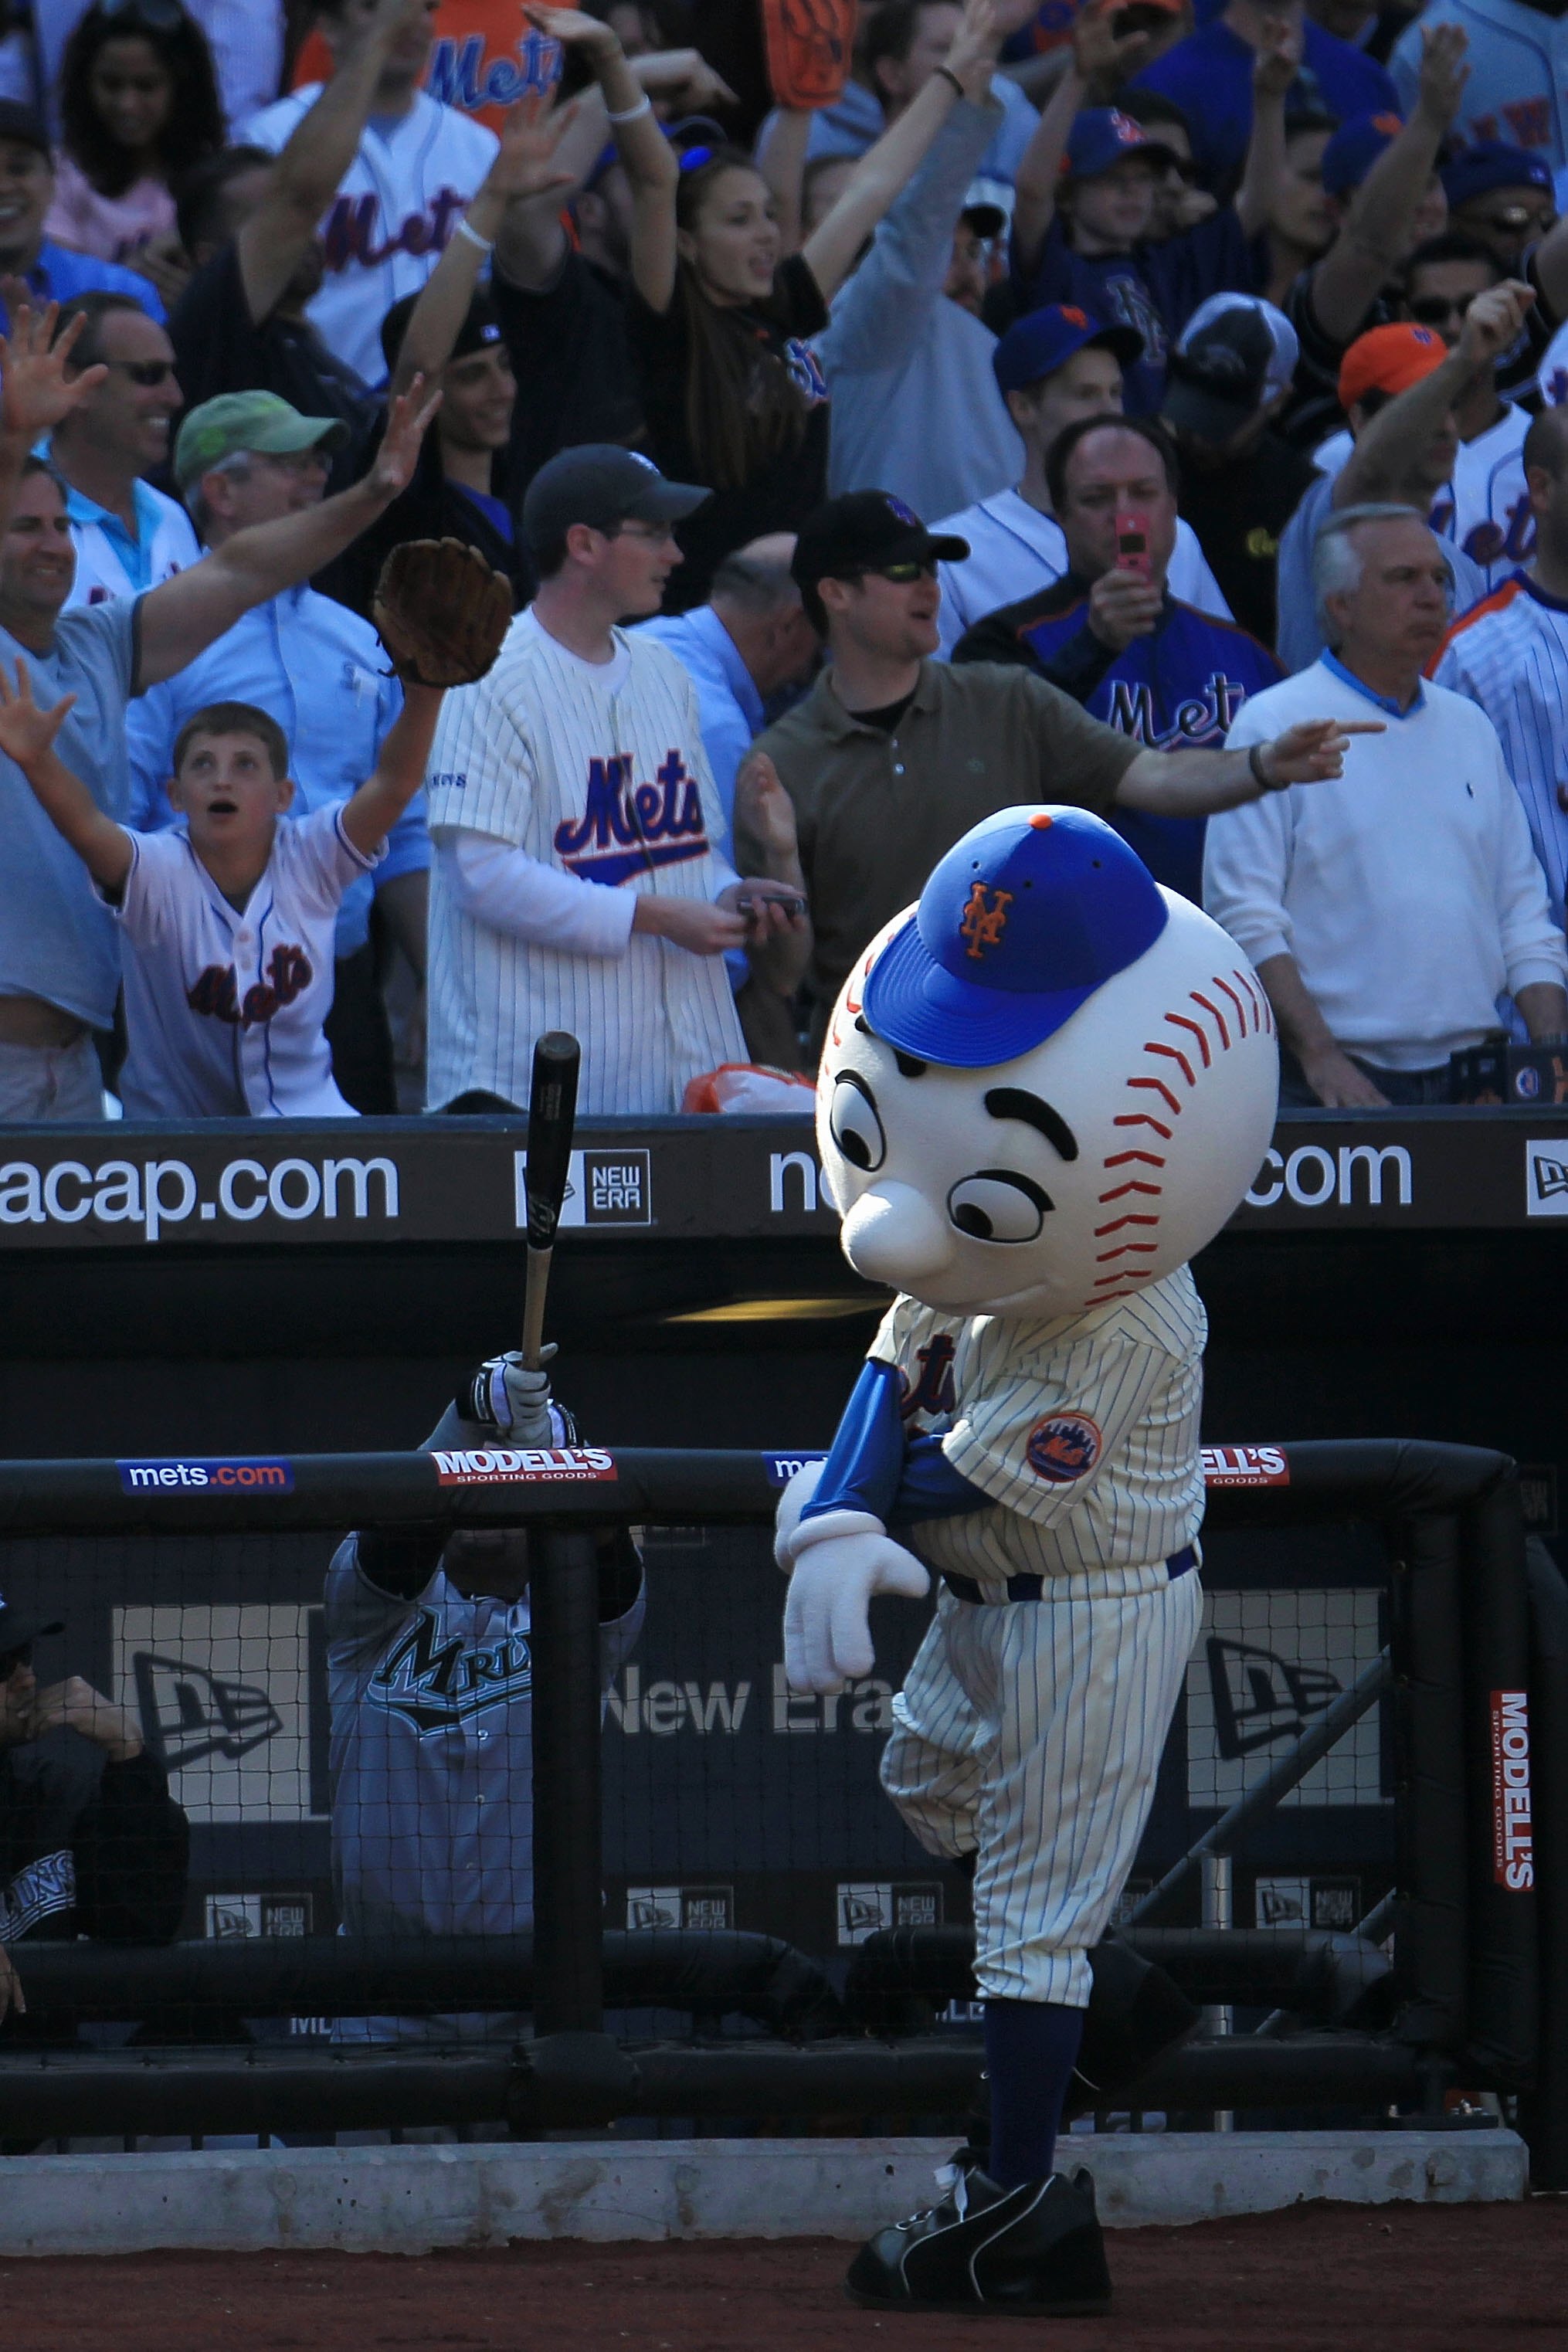 NEW YORK - APRIL 05: Mr. Met interacts with the crowd in the game between the Florida Marlins and the New York Mets during their Opening Day game at Citi Field on April 5, 2010 in the Flushing neighbourhood of the Queens borough of New York City.  (Photo 